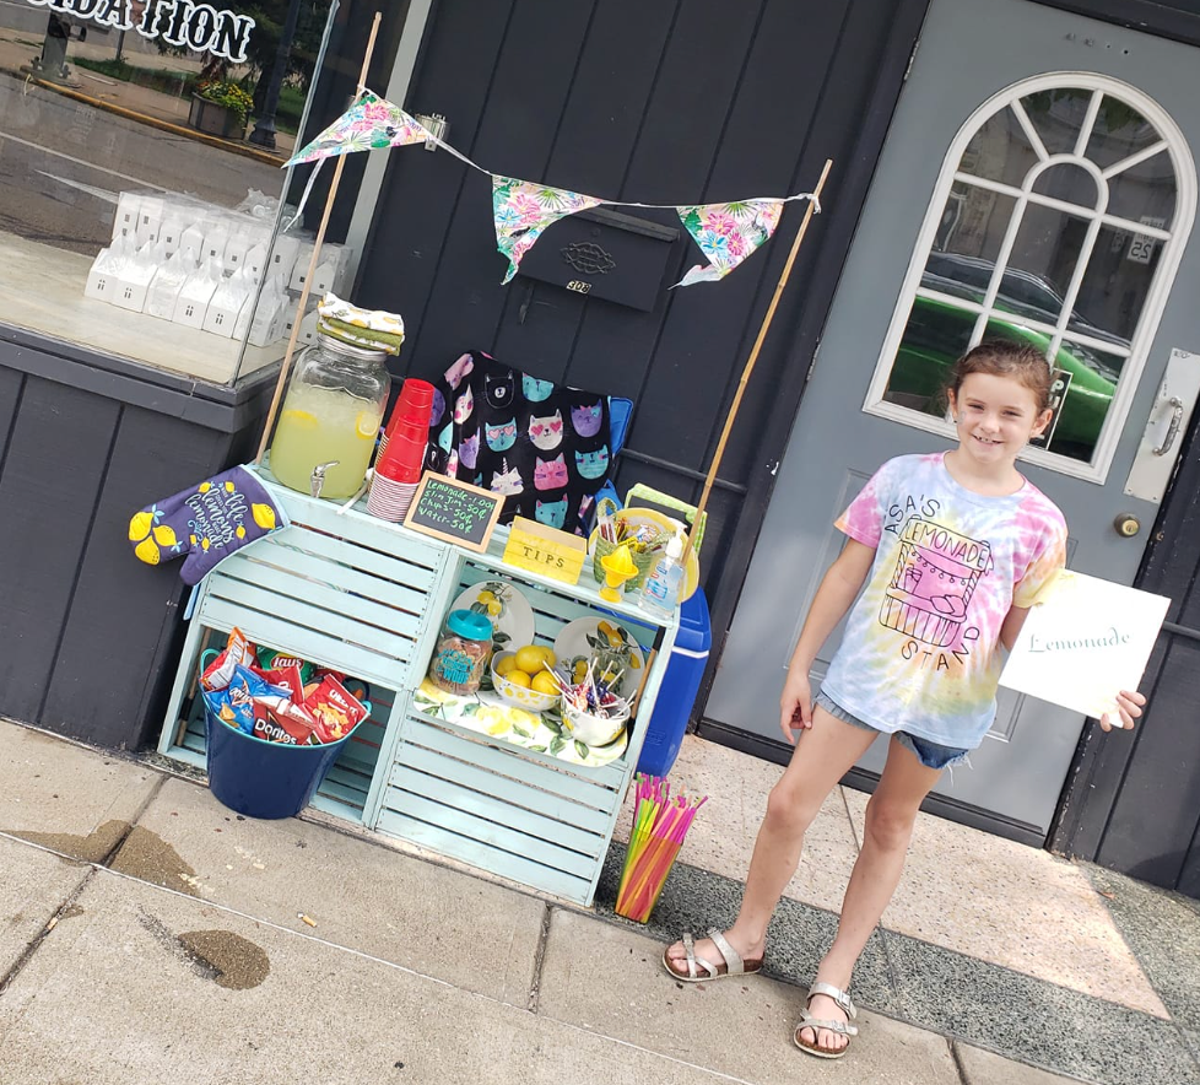 16-year-old's lemonade stand made from former horse trailer